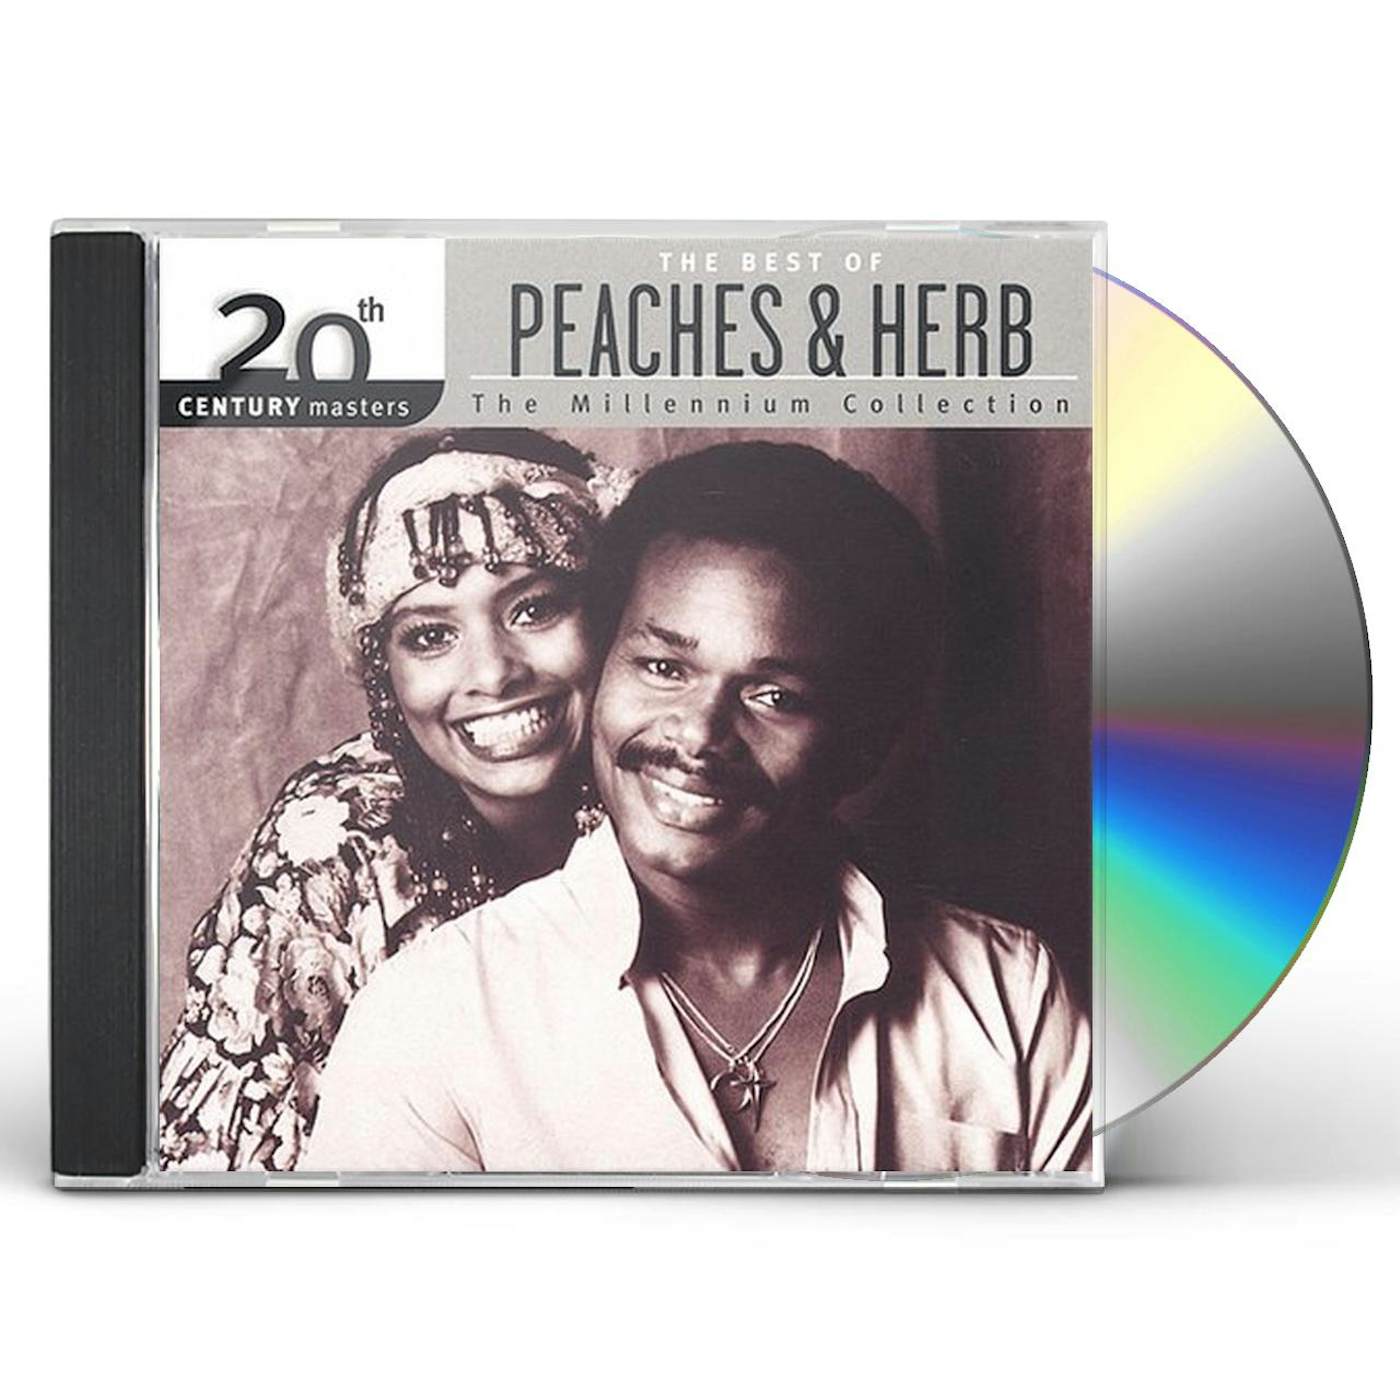 Peaches and Herb Tickets